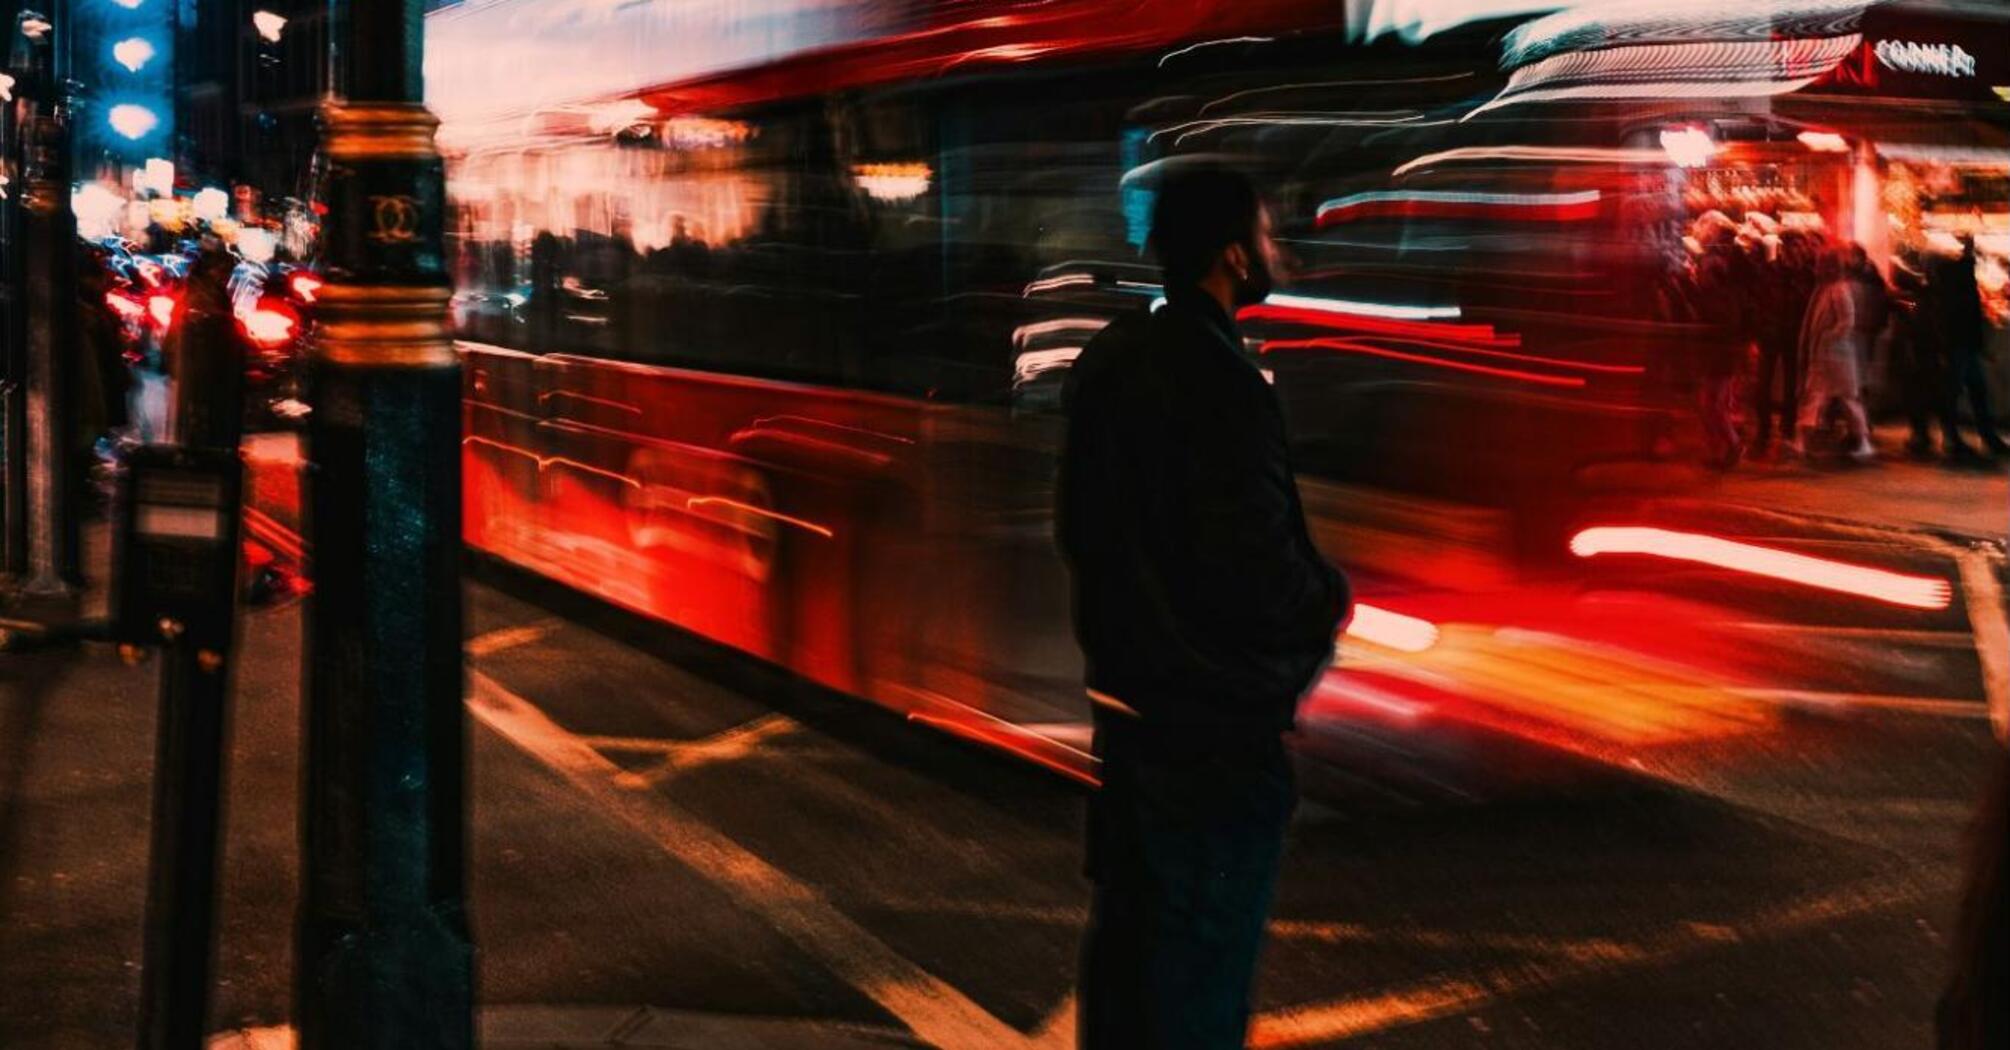 Blurred image of a red double-decker bus at night in a busy city street